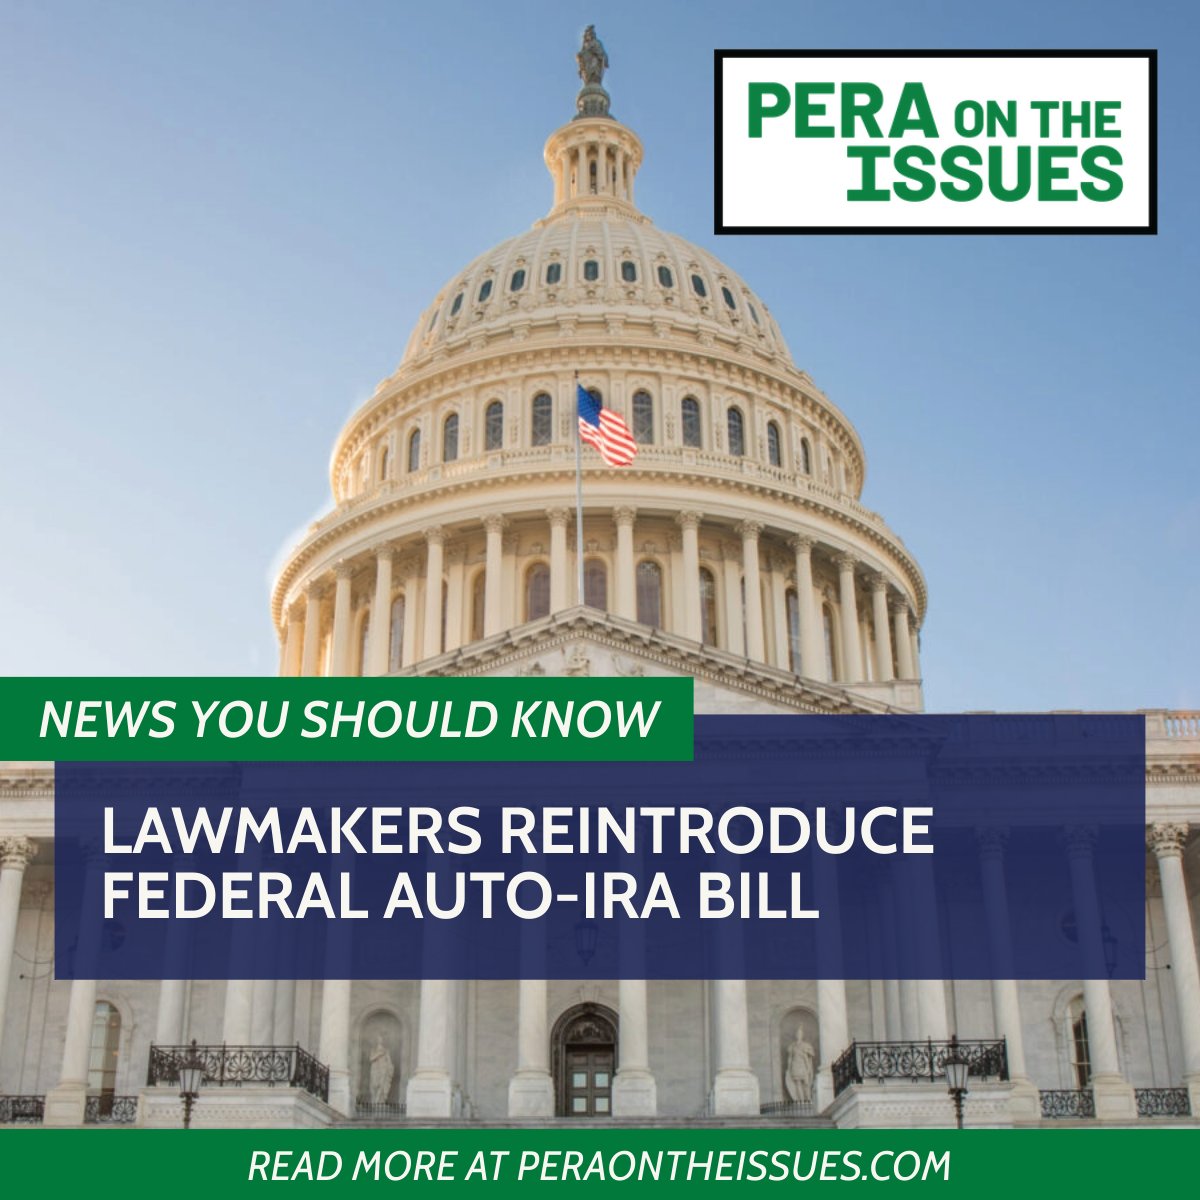 News you should know: 💰 Lawmakers reintroduce federal auto-IRA bill 🏦 A controversial proposal to shore up Social Security ☮️ Parallels between the '60s and current economic mood 👵 Tips for caring for aging parents peraontheissues.com/news-you-shoul…